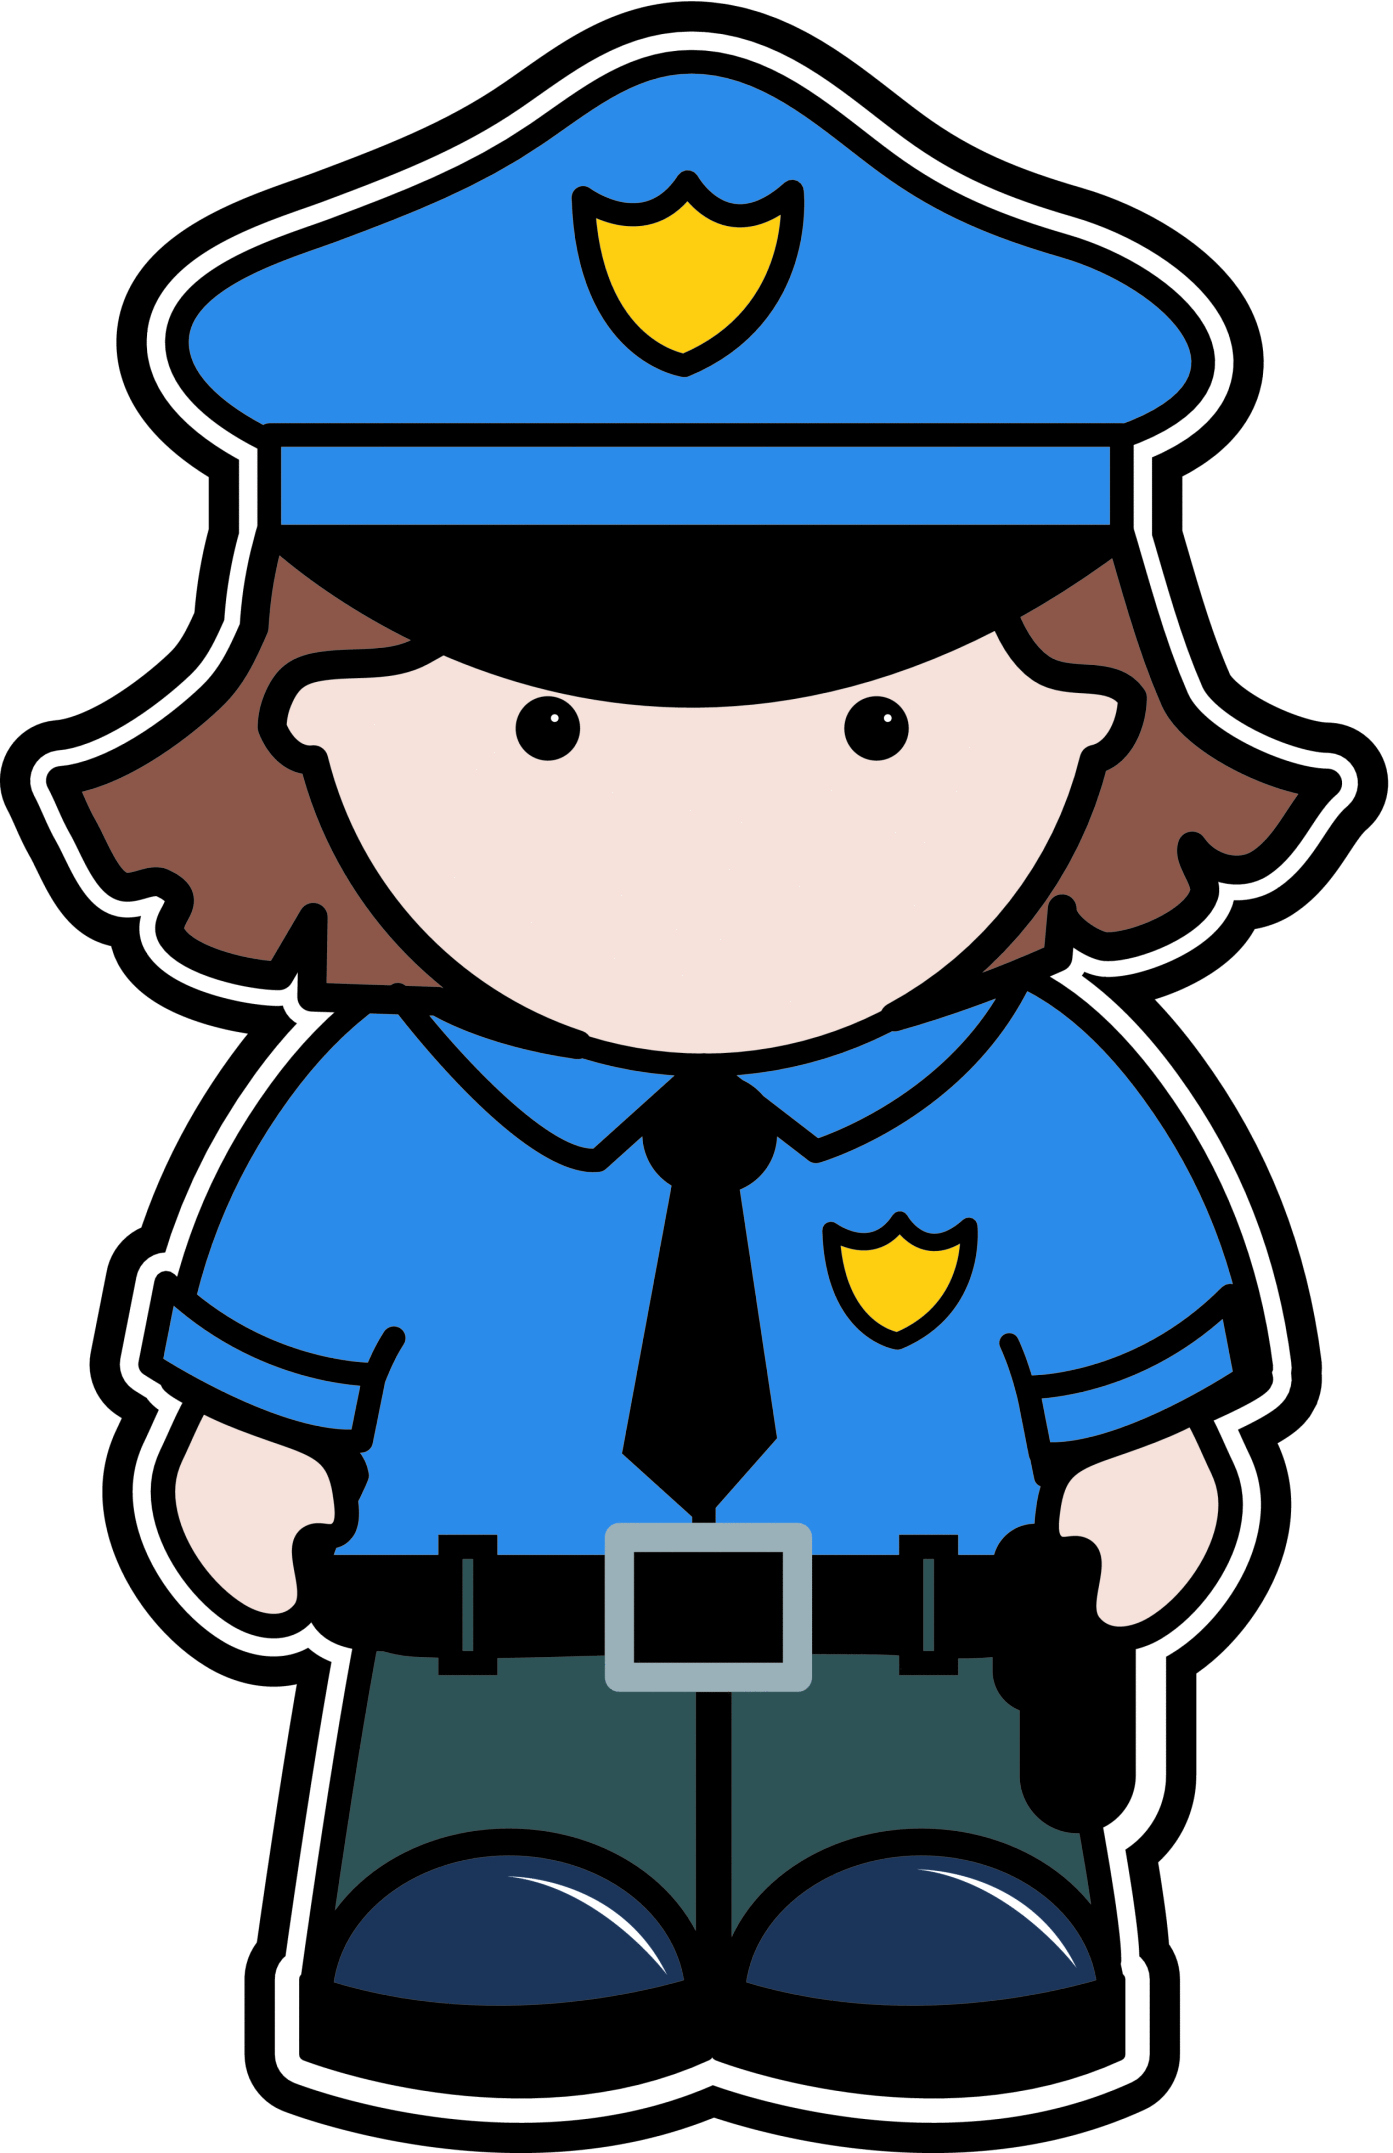 clip art images police officer - photo #15